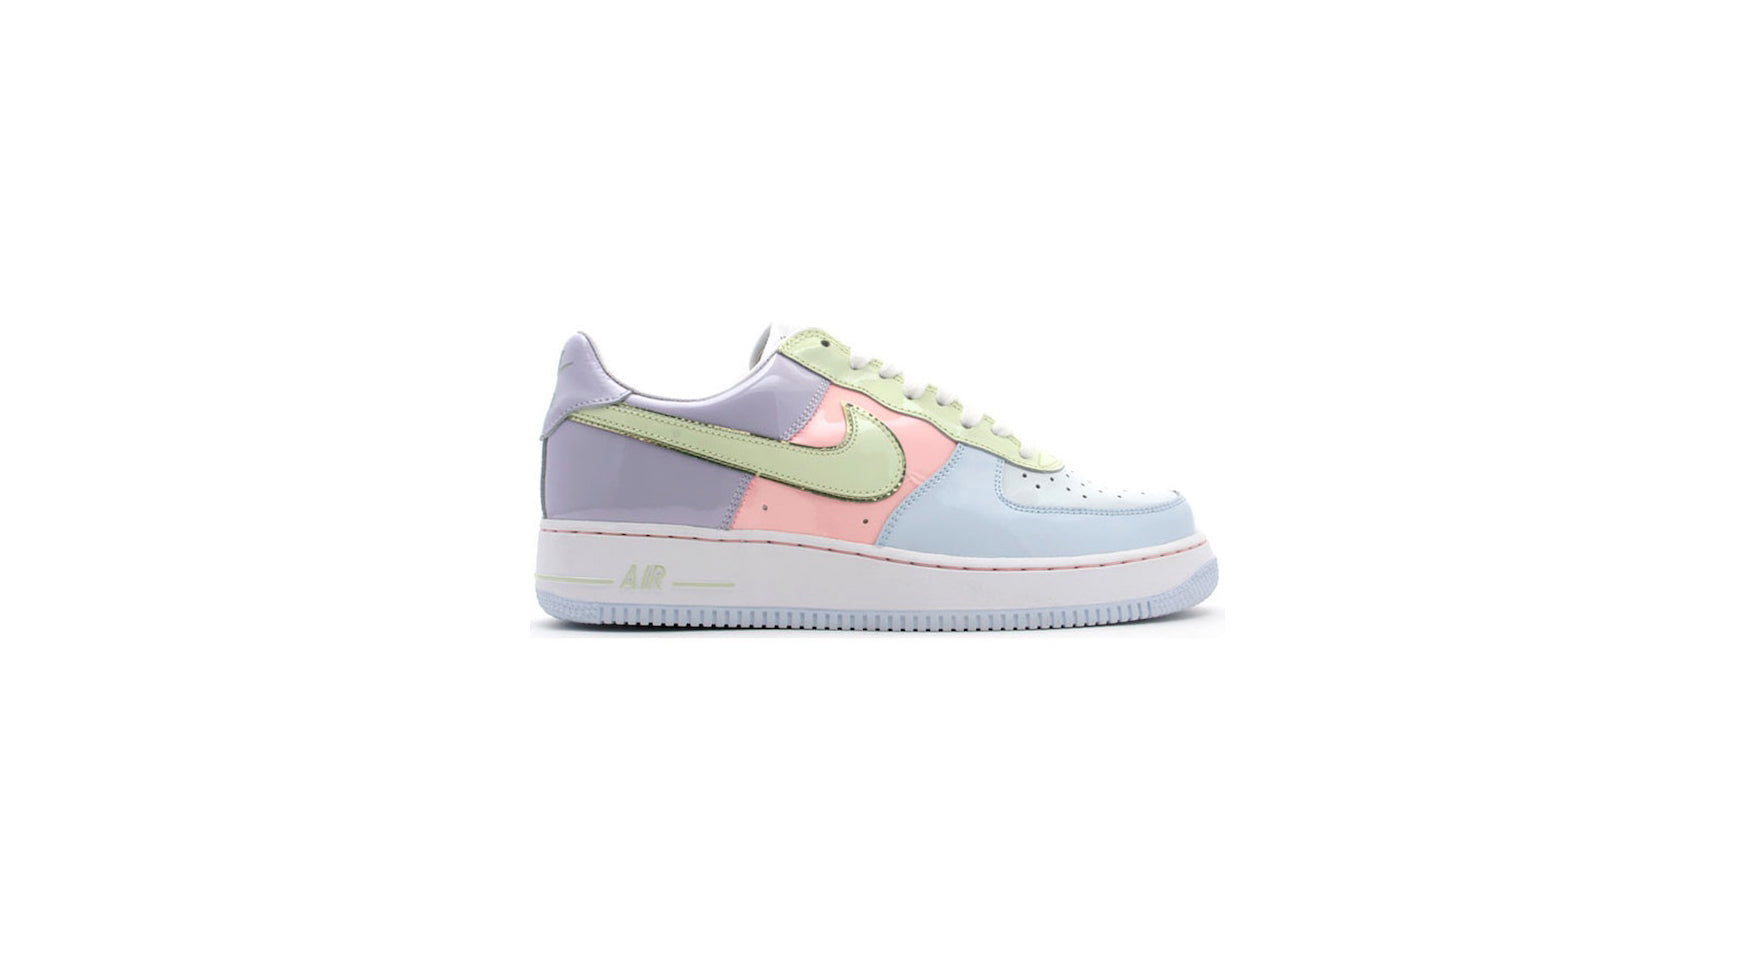 Top 10 Easter Themed Sneakers To Date